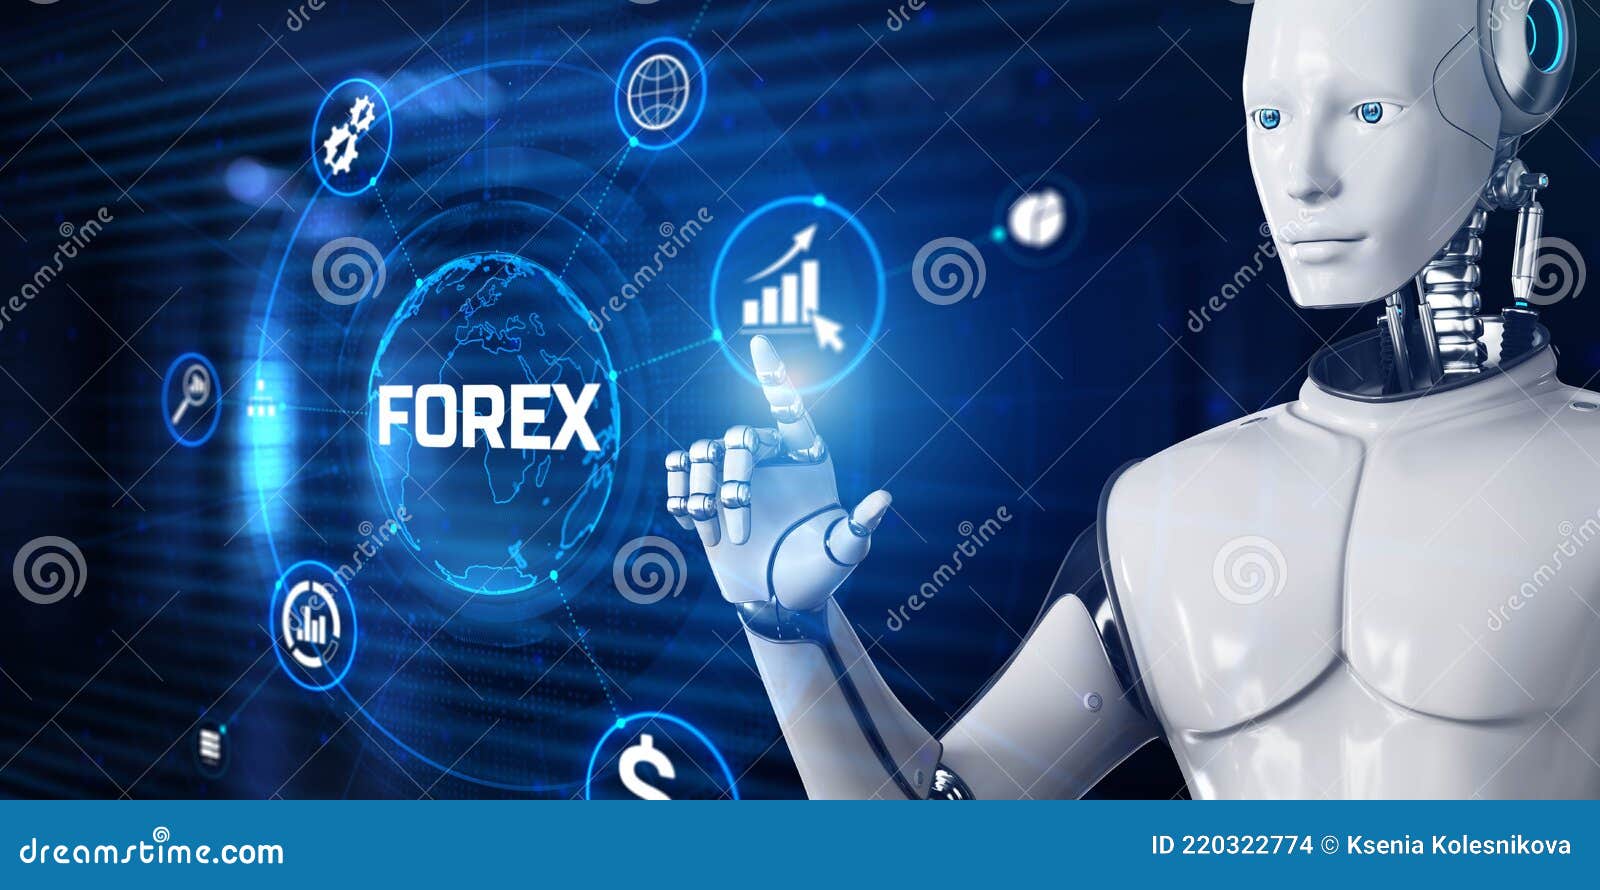 Forex Robot Trading Automation Concept. Robot Pressing Button Screen 3d Render Stock - Illustration financial, market: 220322774